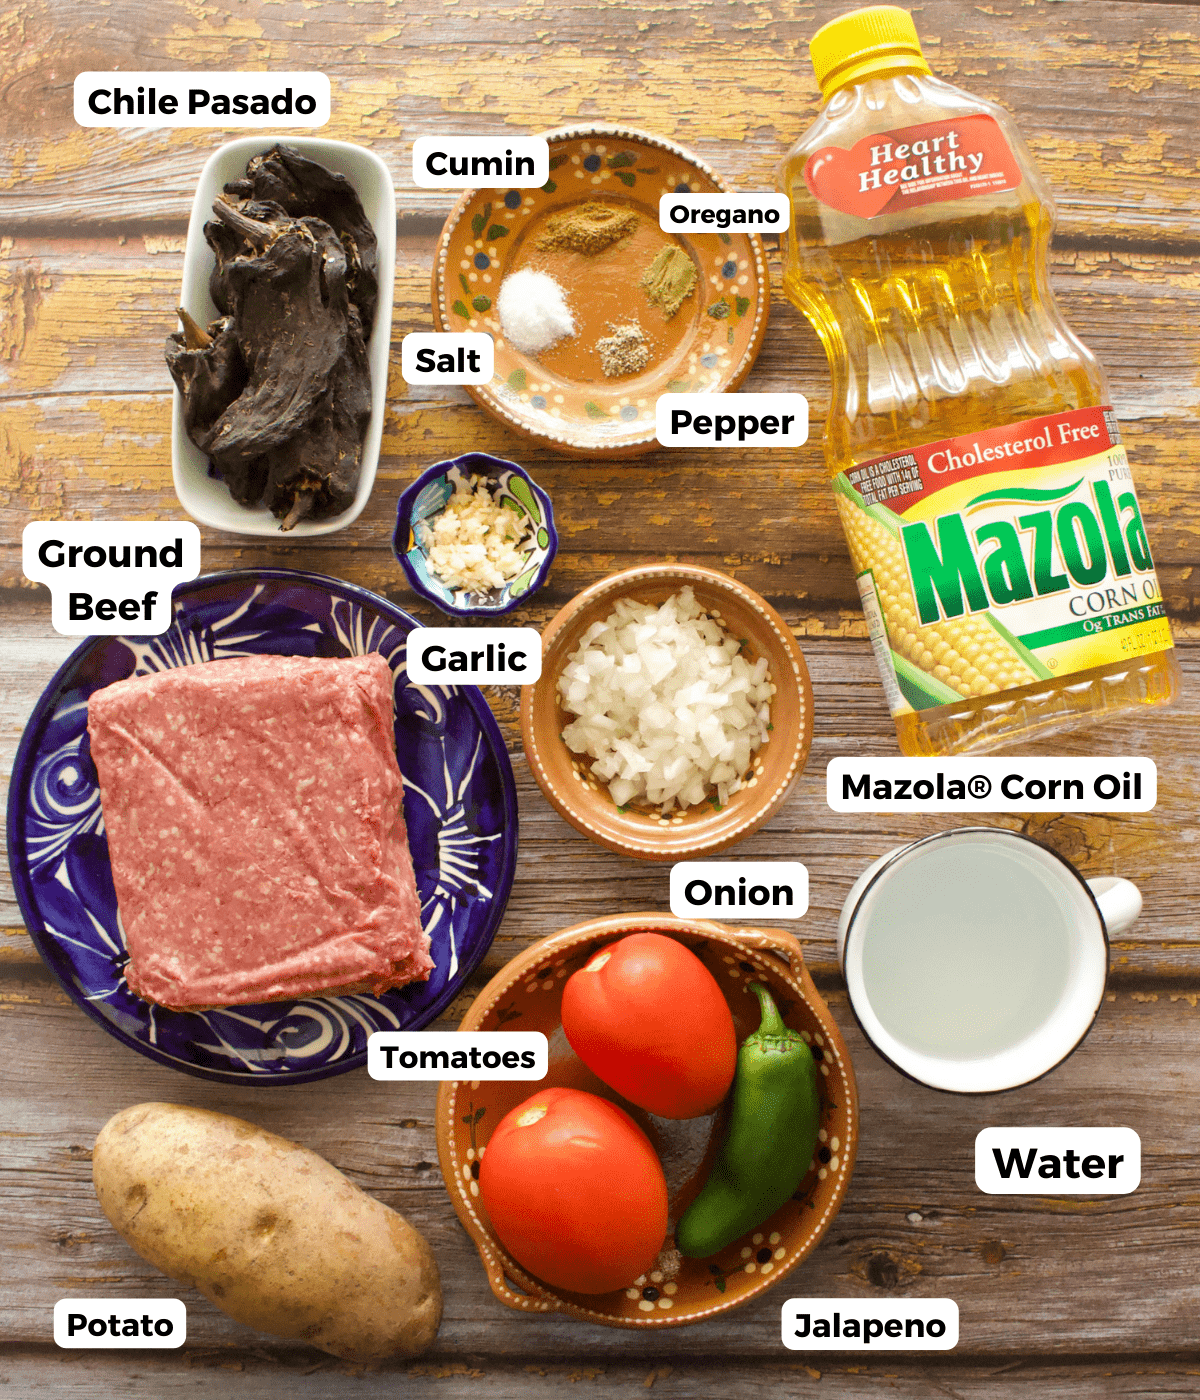 The ingredients needed to make Mexican picadillo labeled on a wooden surface.